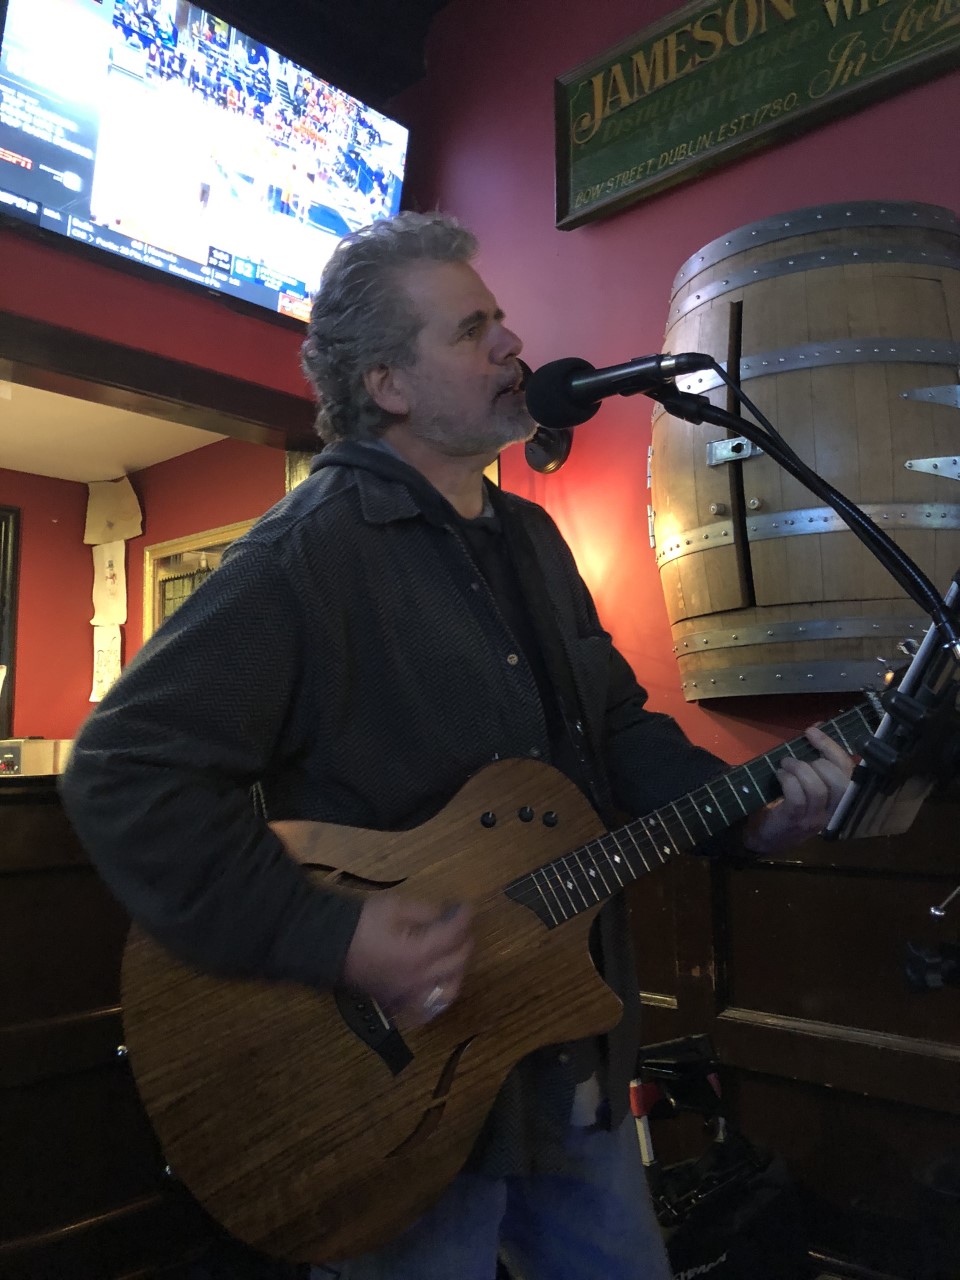 Andy Del solo at Castaways Steak & Seafood in Port Jefferson, NY - Sunday, May 19th